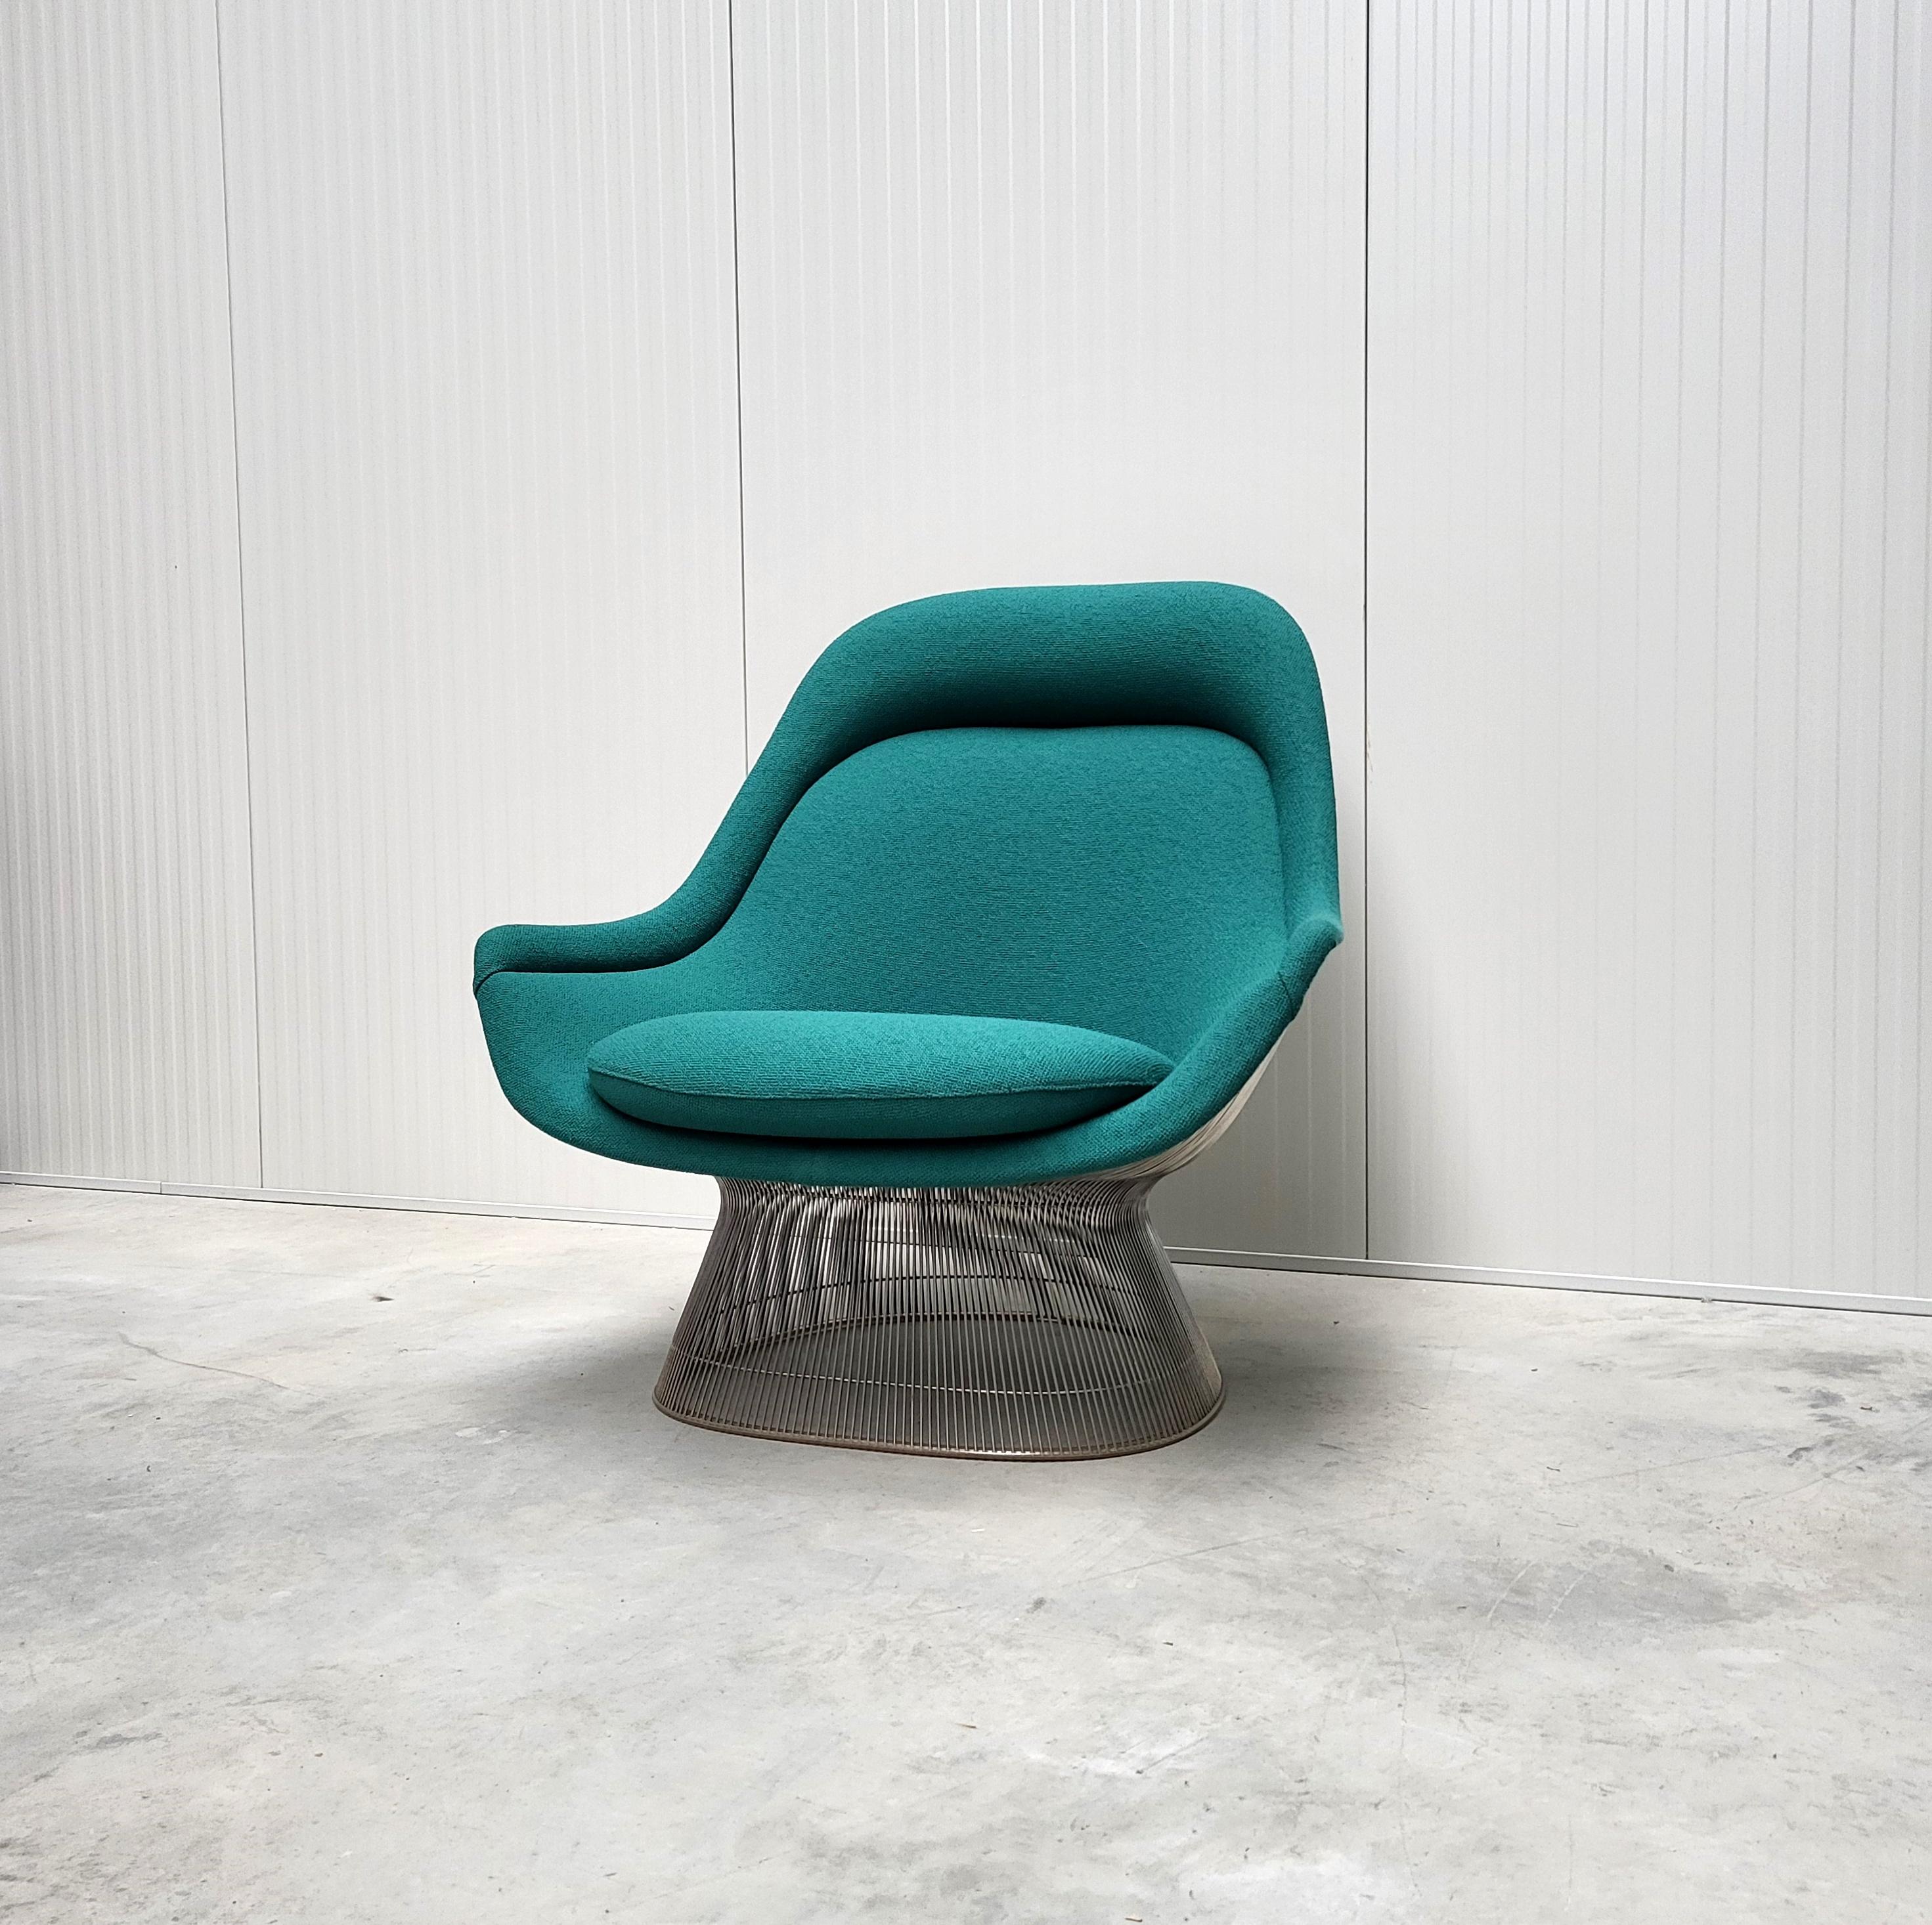 Early Easy Lounge chair by Warren Platner for Knoll. 

The groundbreaking Easy chair was designed in the 1960s by Warren Platner and produced by Knoll in the early 1980s. This mid-century classic supports countless positions and offers a comforting